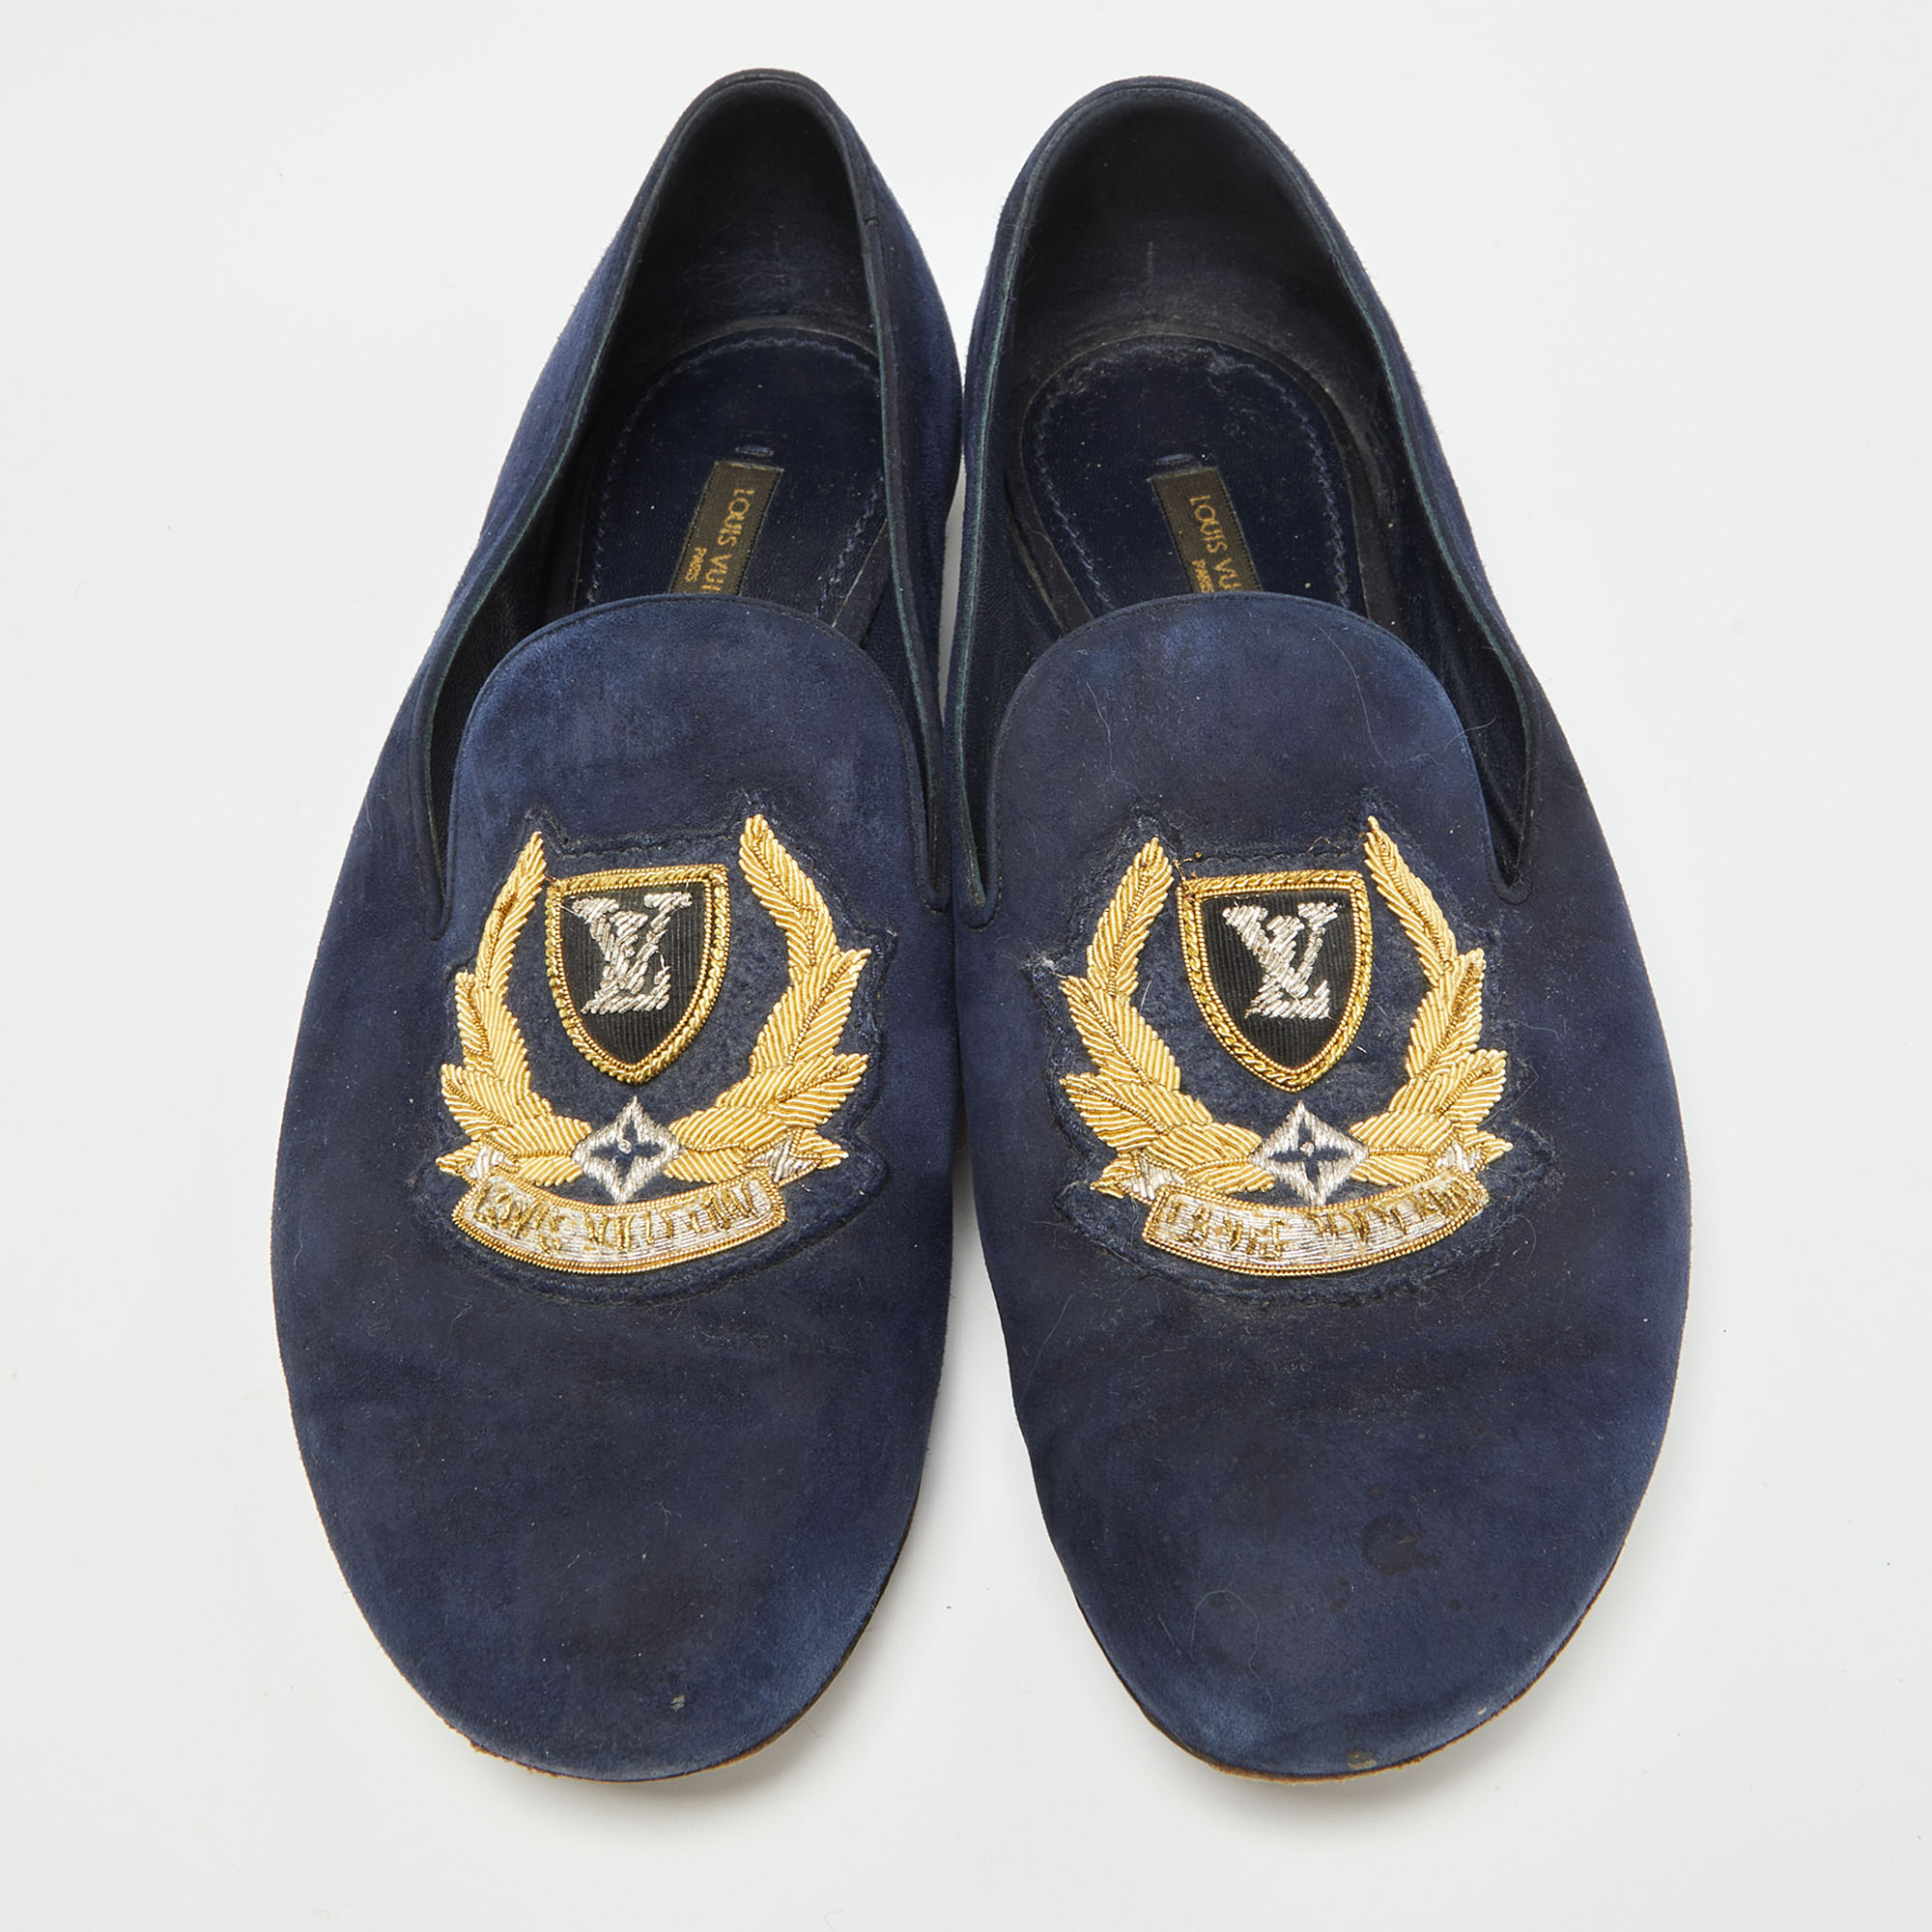 Louis Vuitton Navy Blue Suede Embroidered Smoking Slippers Size 38